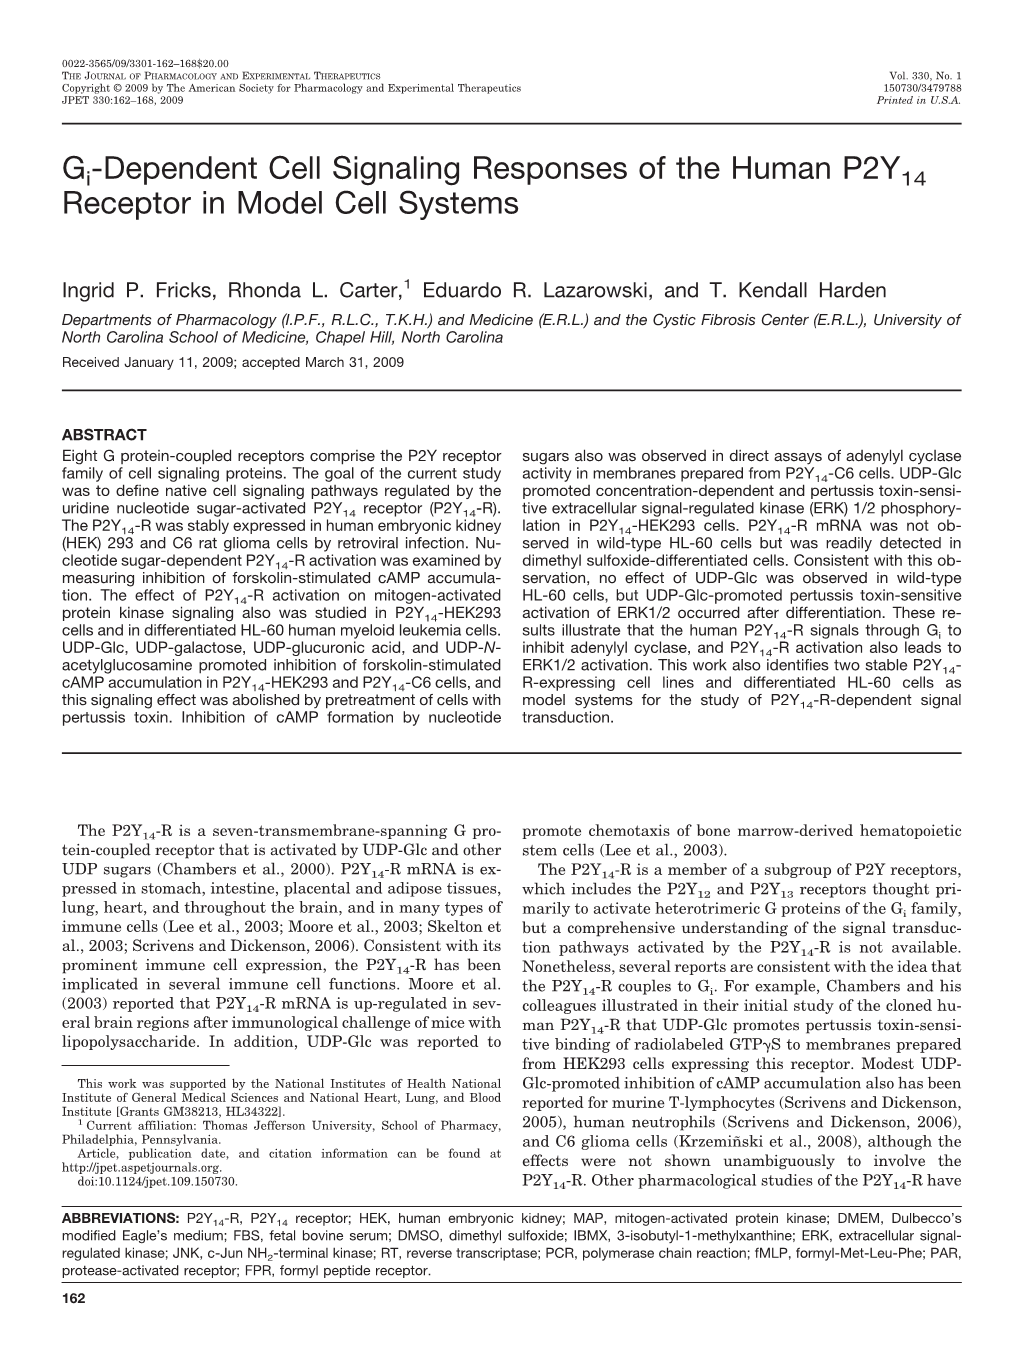 Dependent Cell Signaling Responses of the Human P2Y14 Receptor in Model Cell Systems